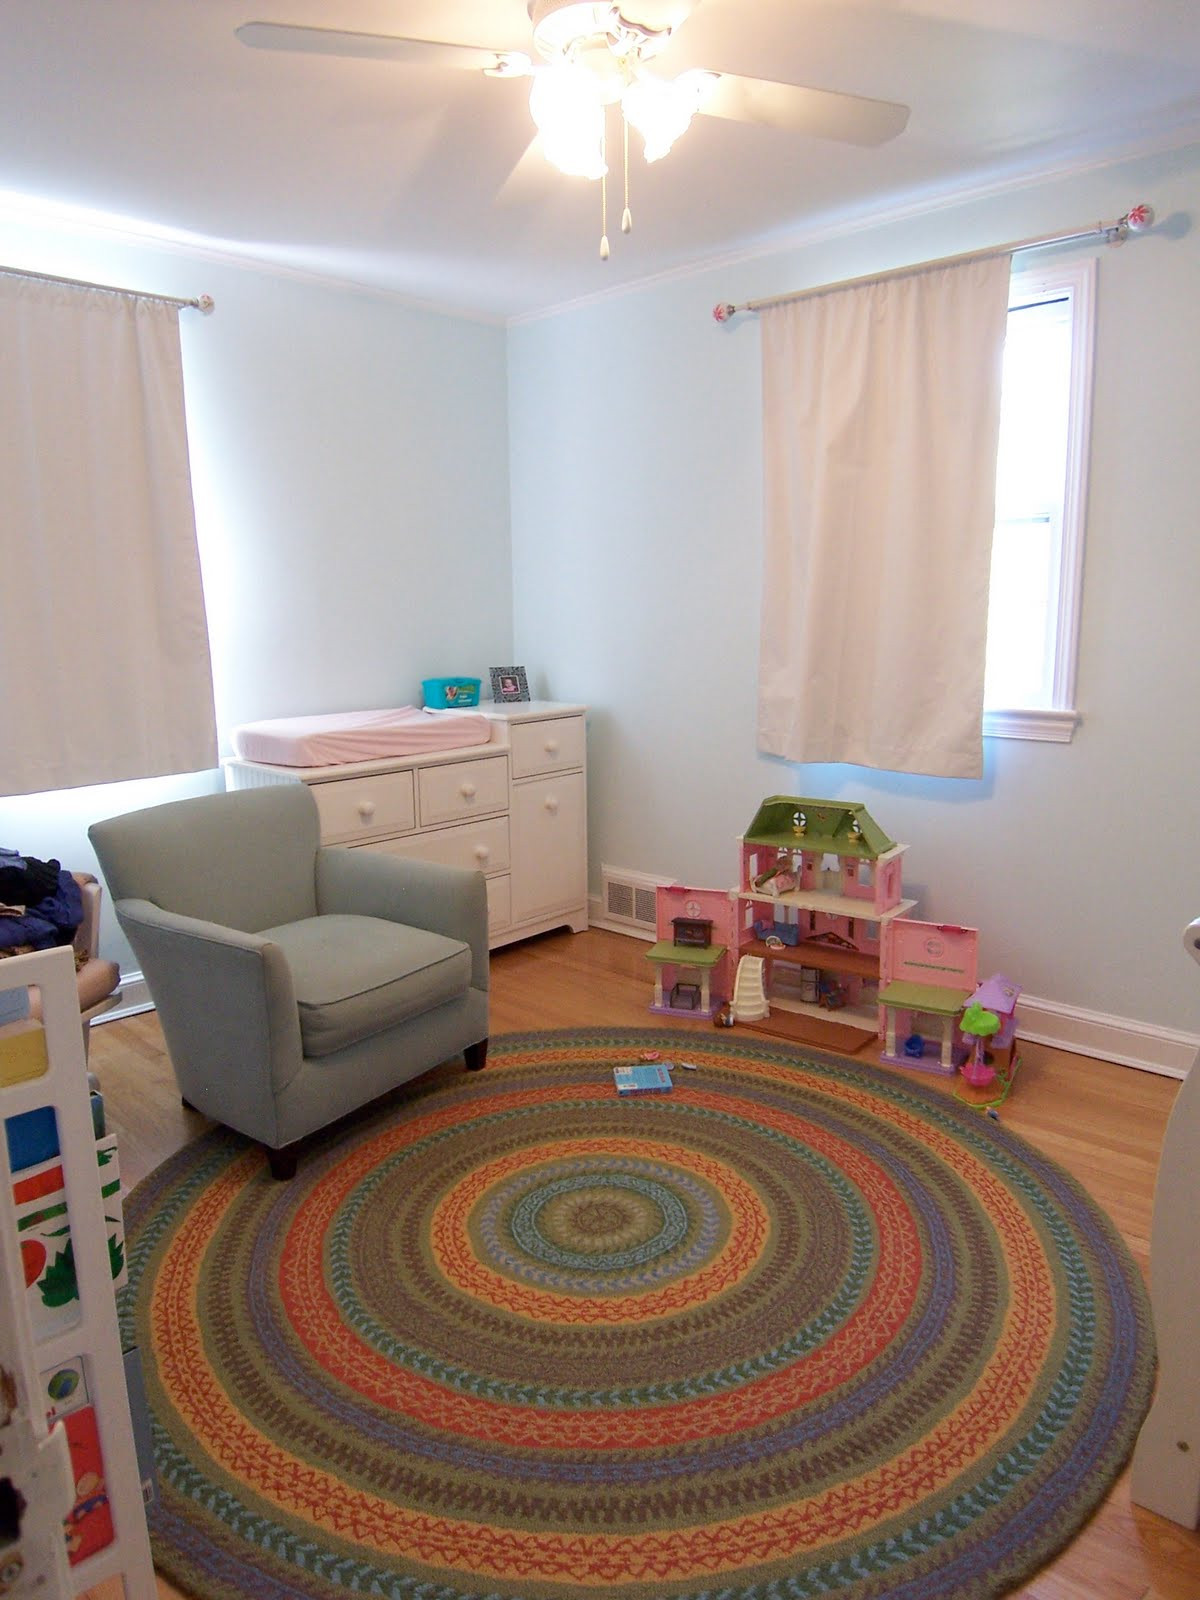 Round Rug In Living Room
 When should you use a round rug Rules and a success